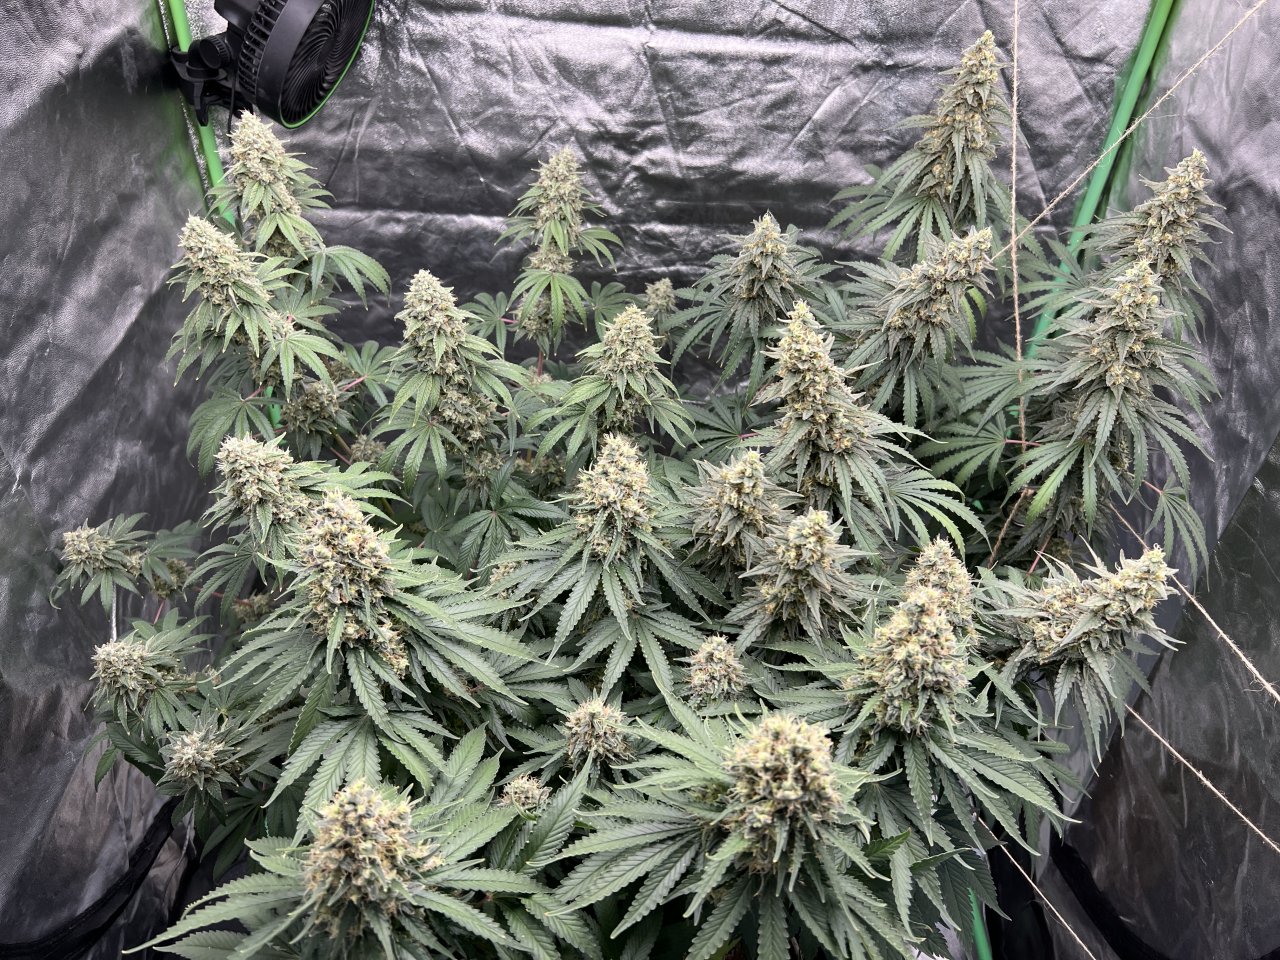 Family canopy Day 80 and day 52 of flower (week 7.5)